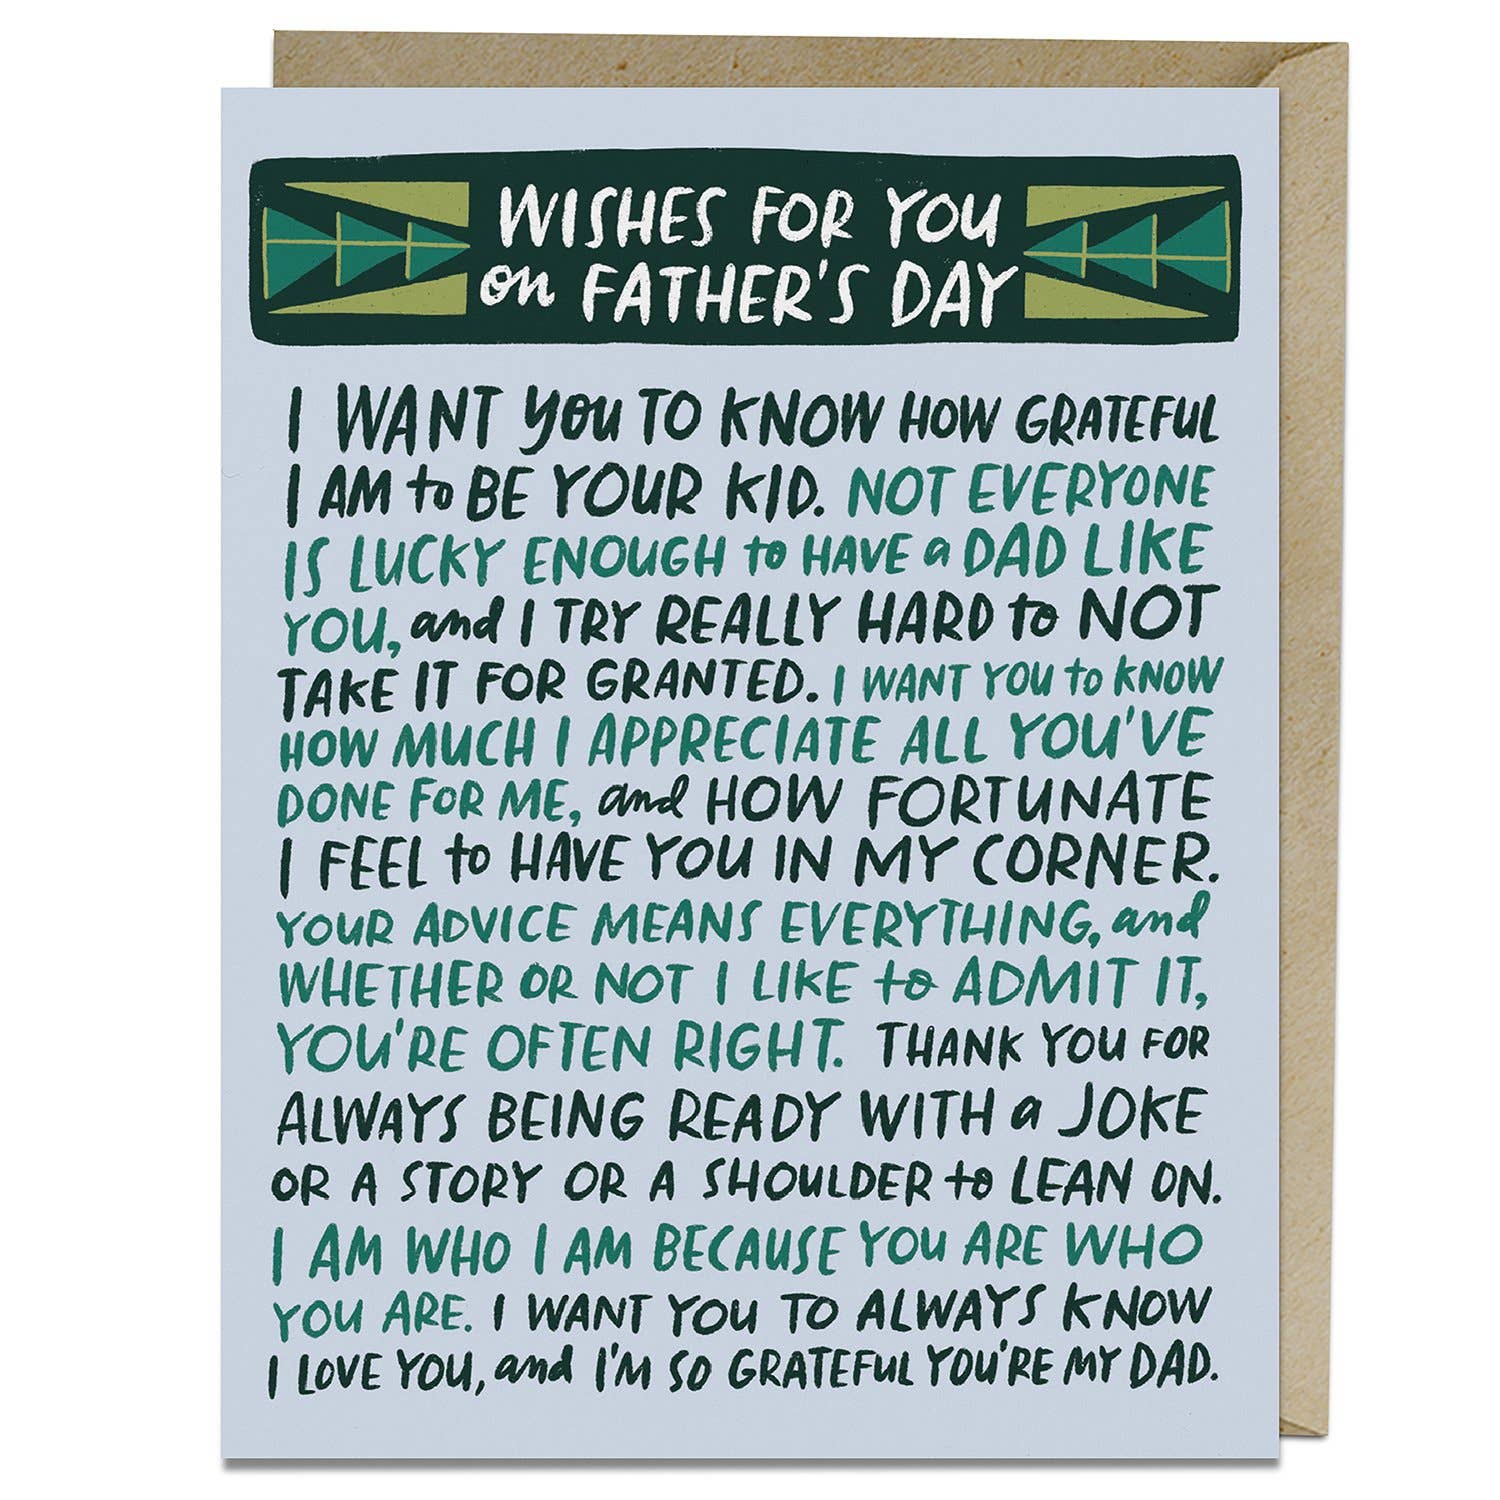 Em & Friends - Wishes For You Fathers Day Card